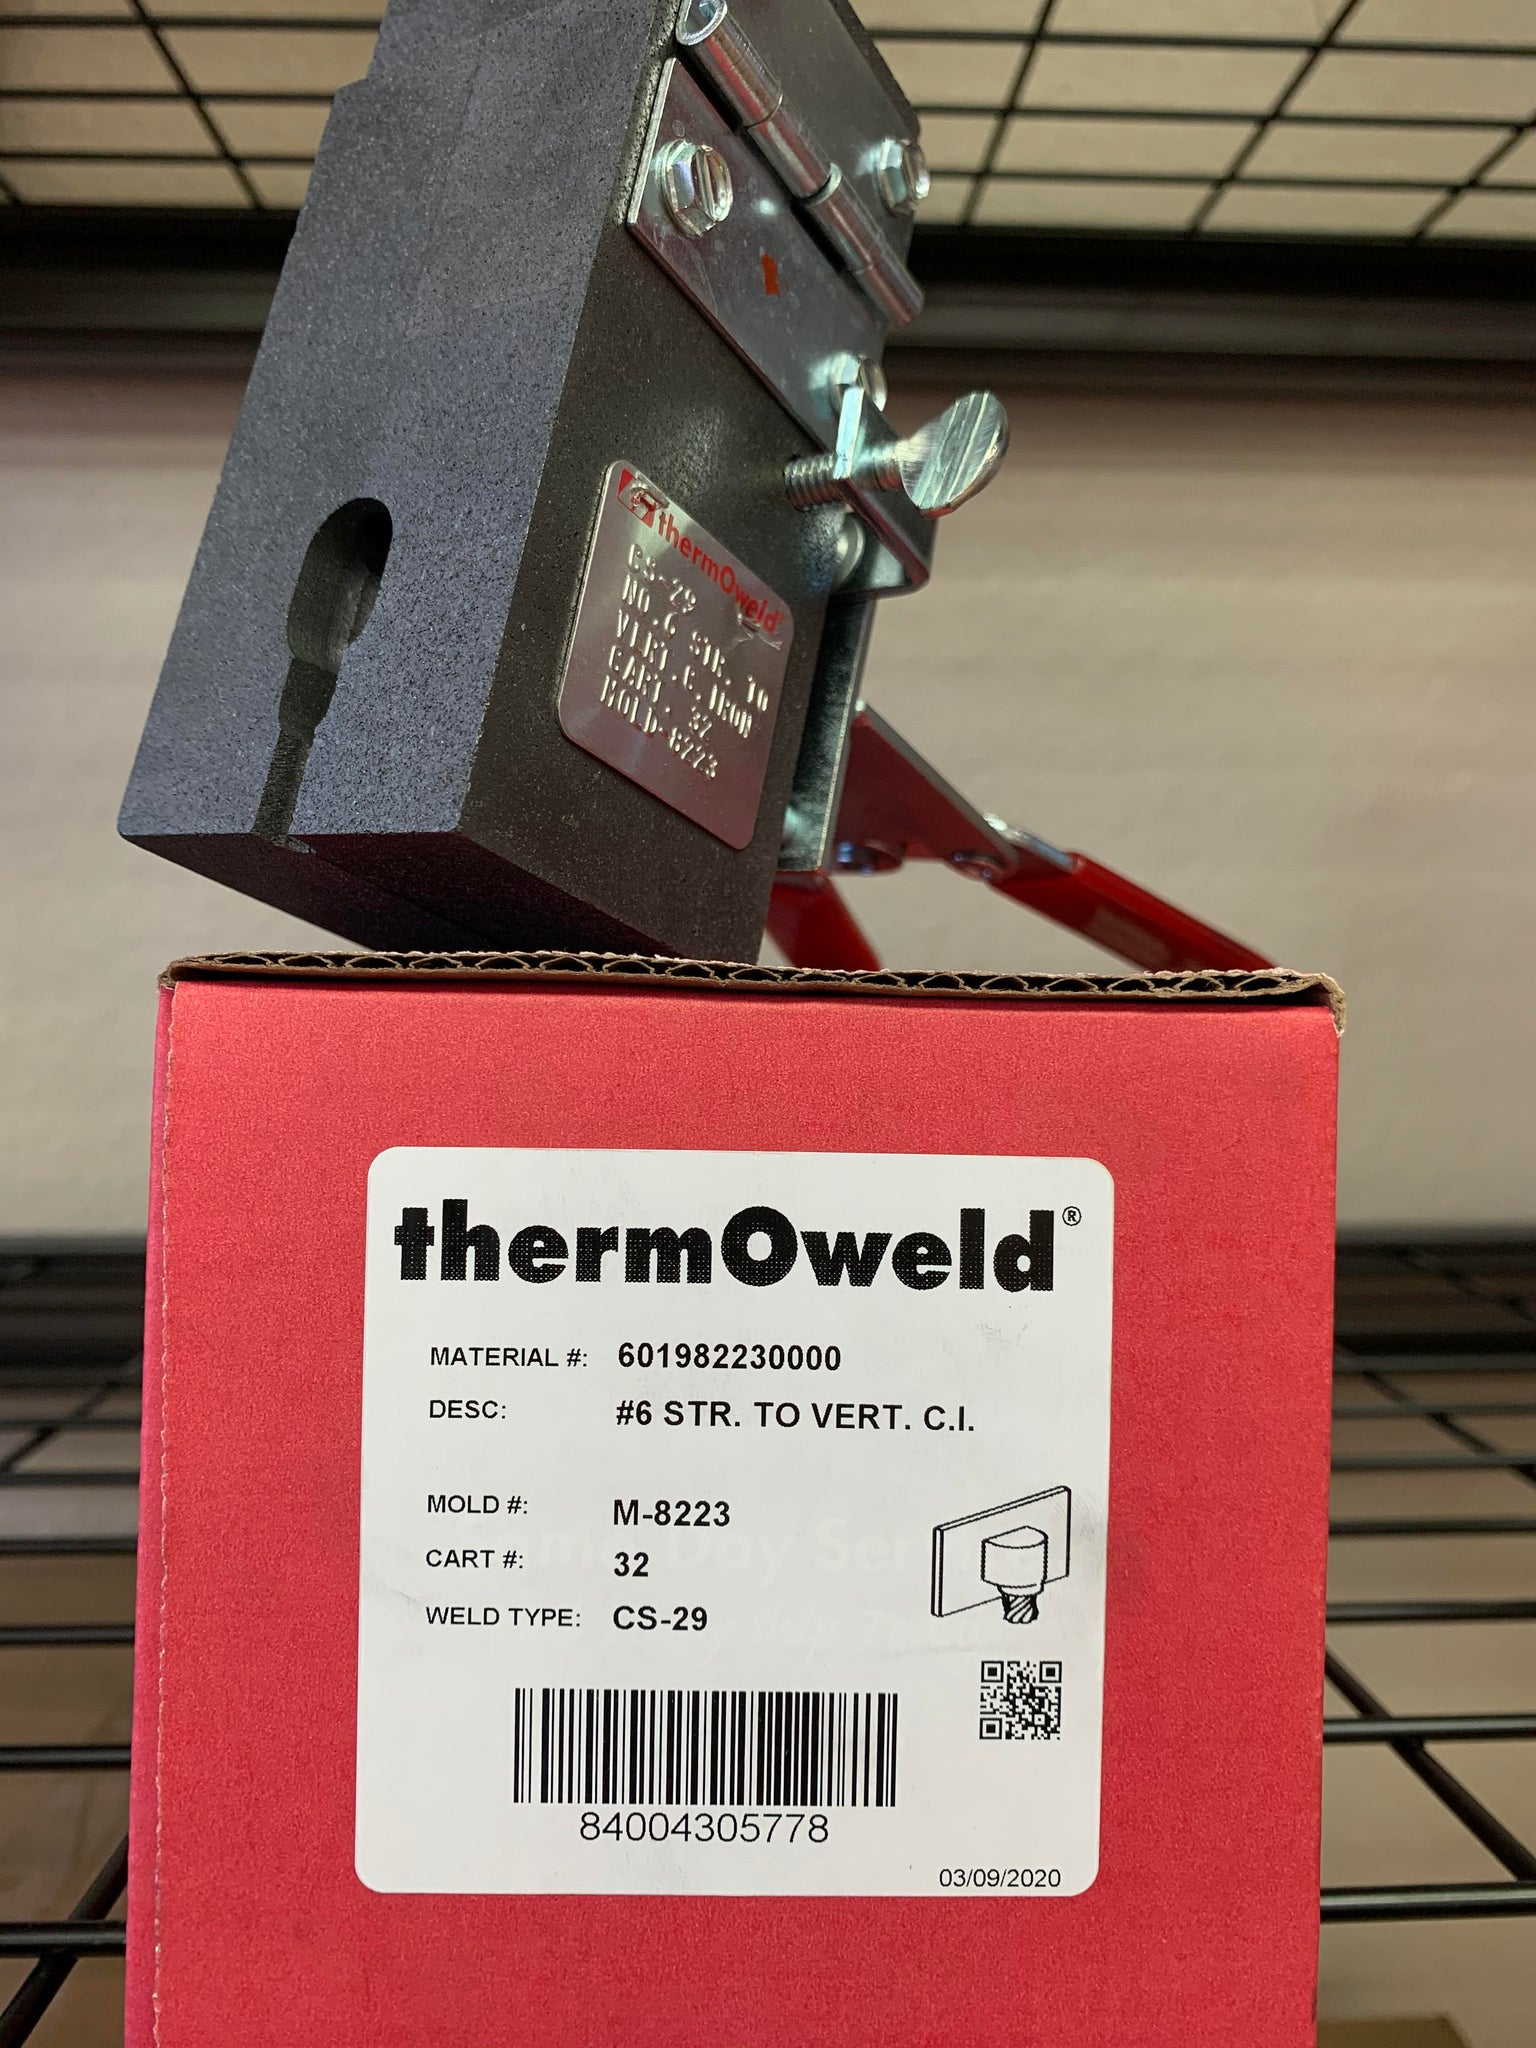 Thermoweld M-8223 Weld Mold (Vertical Mold)